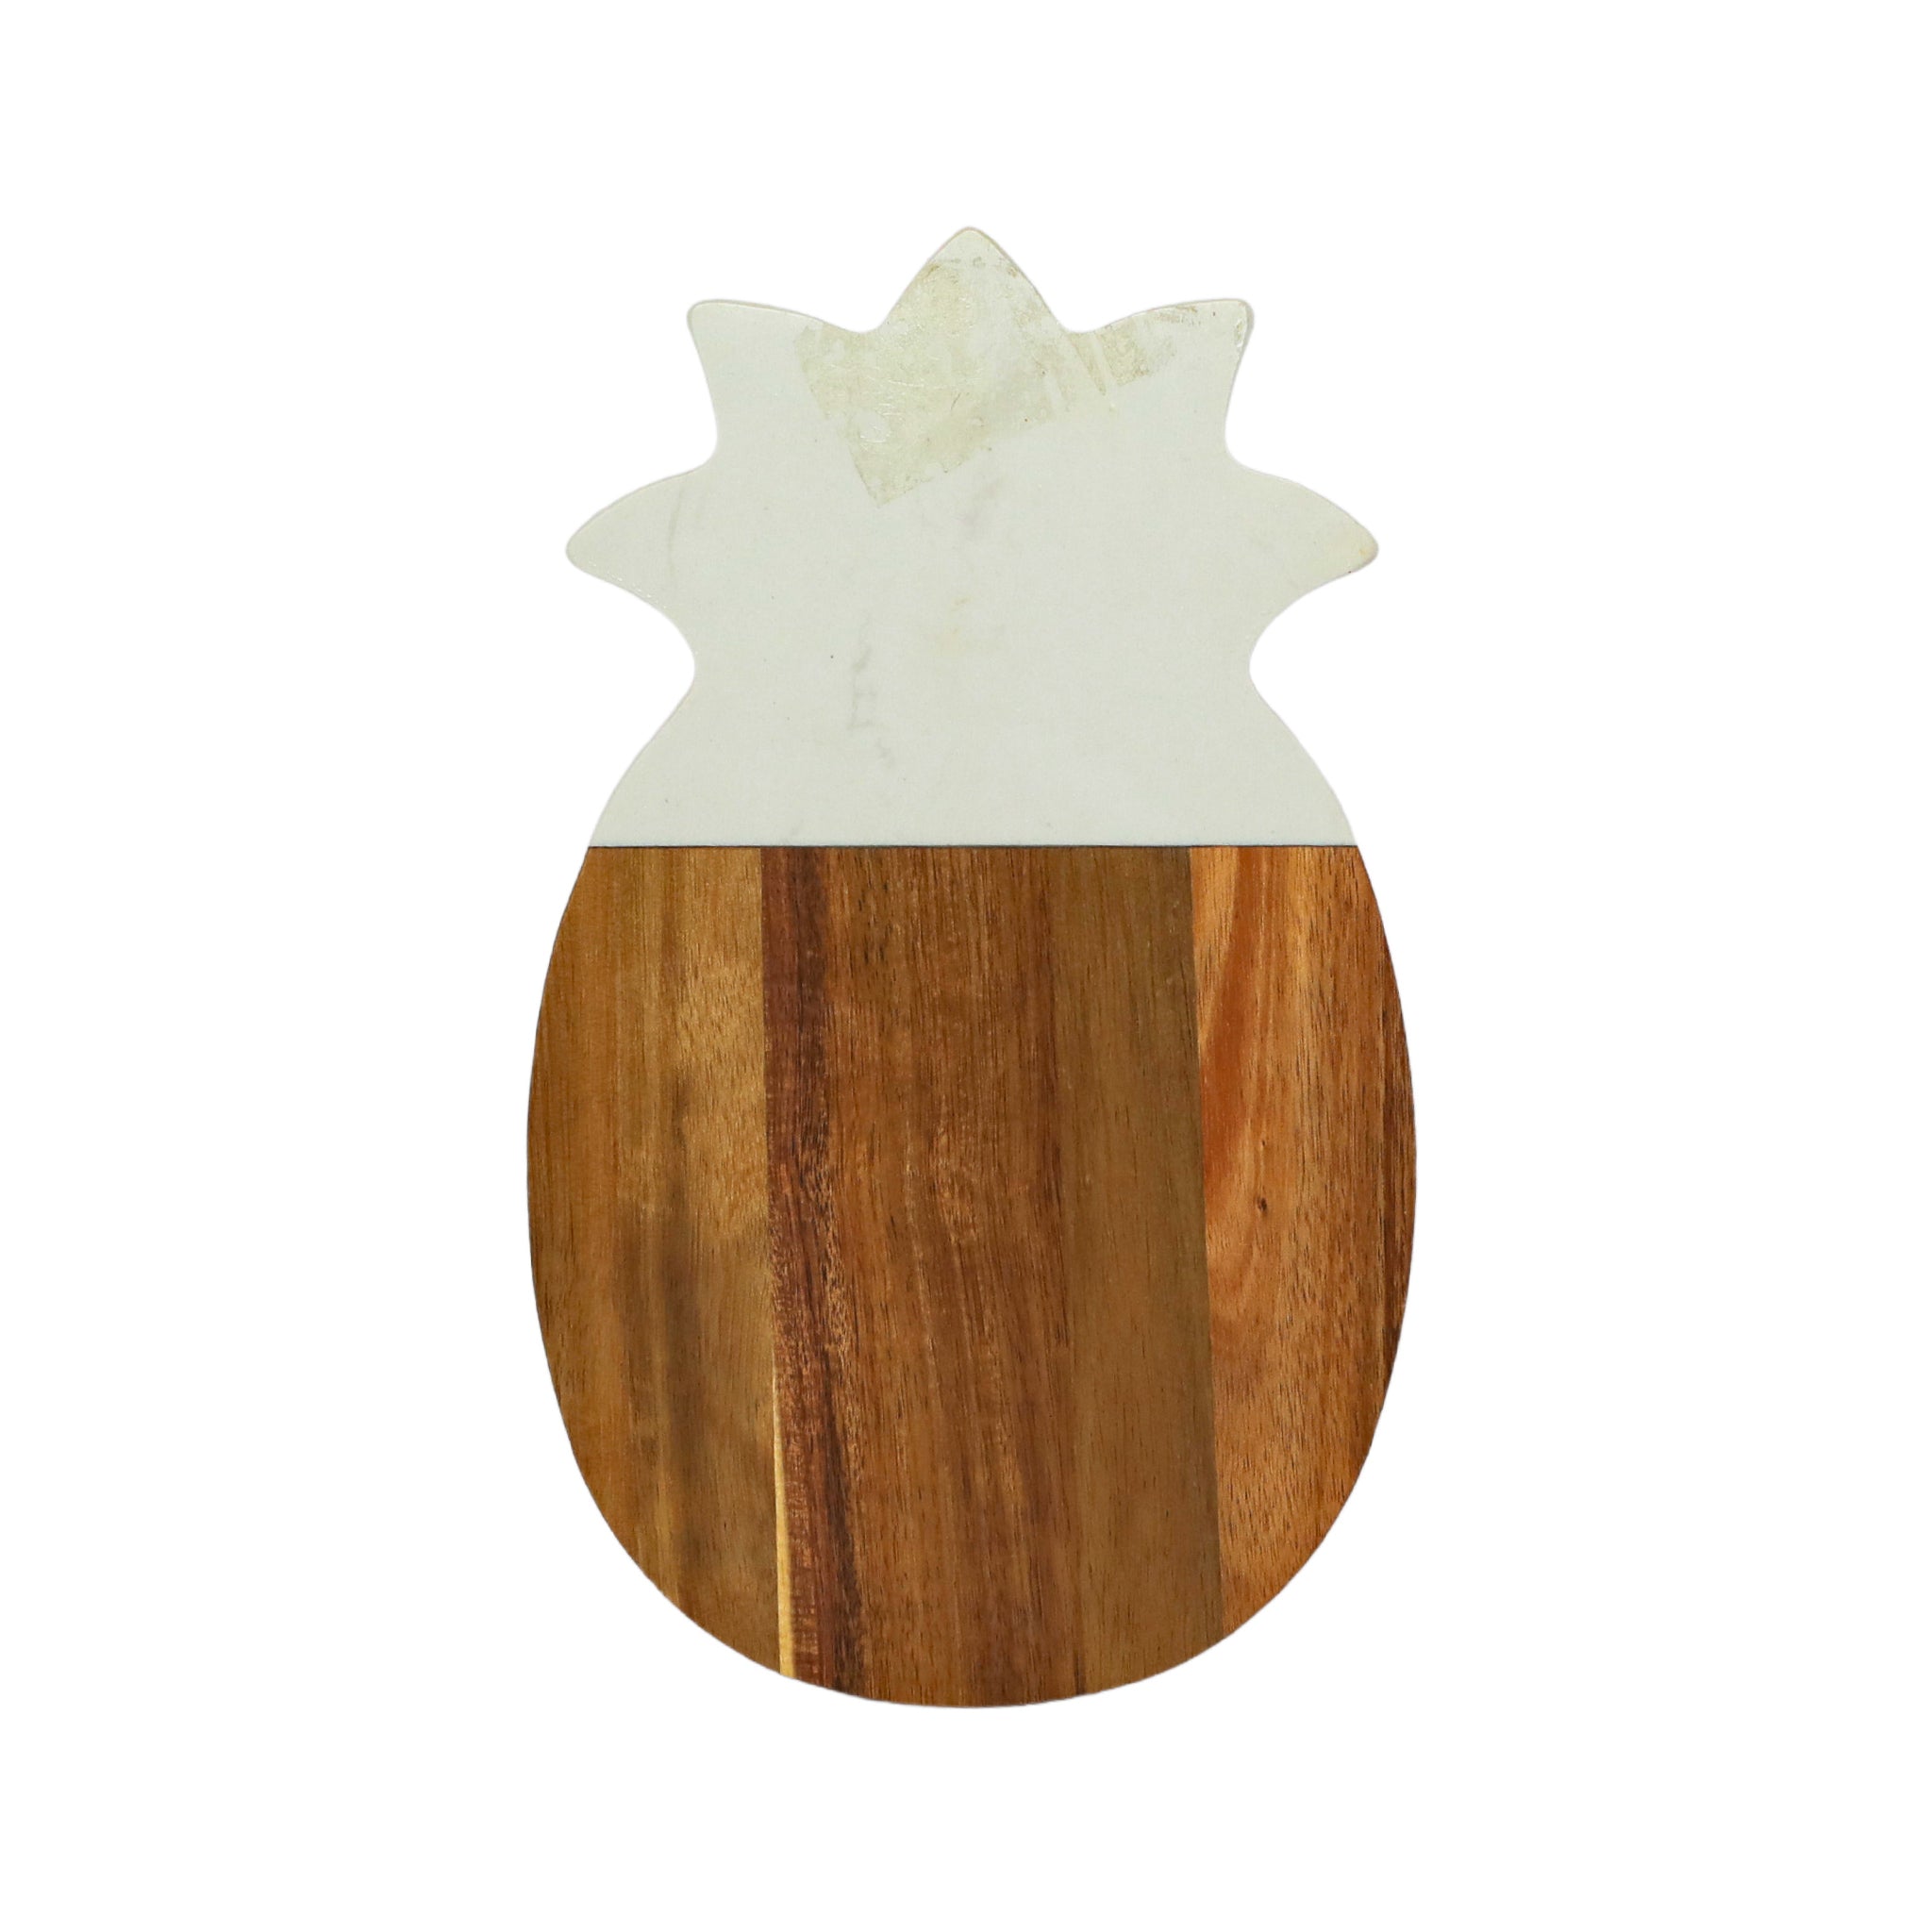 Creative Gifts Giftware White Marble/Acacia Wood Pineapple 12" x 7"